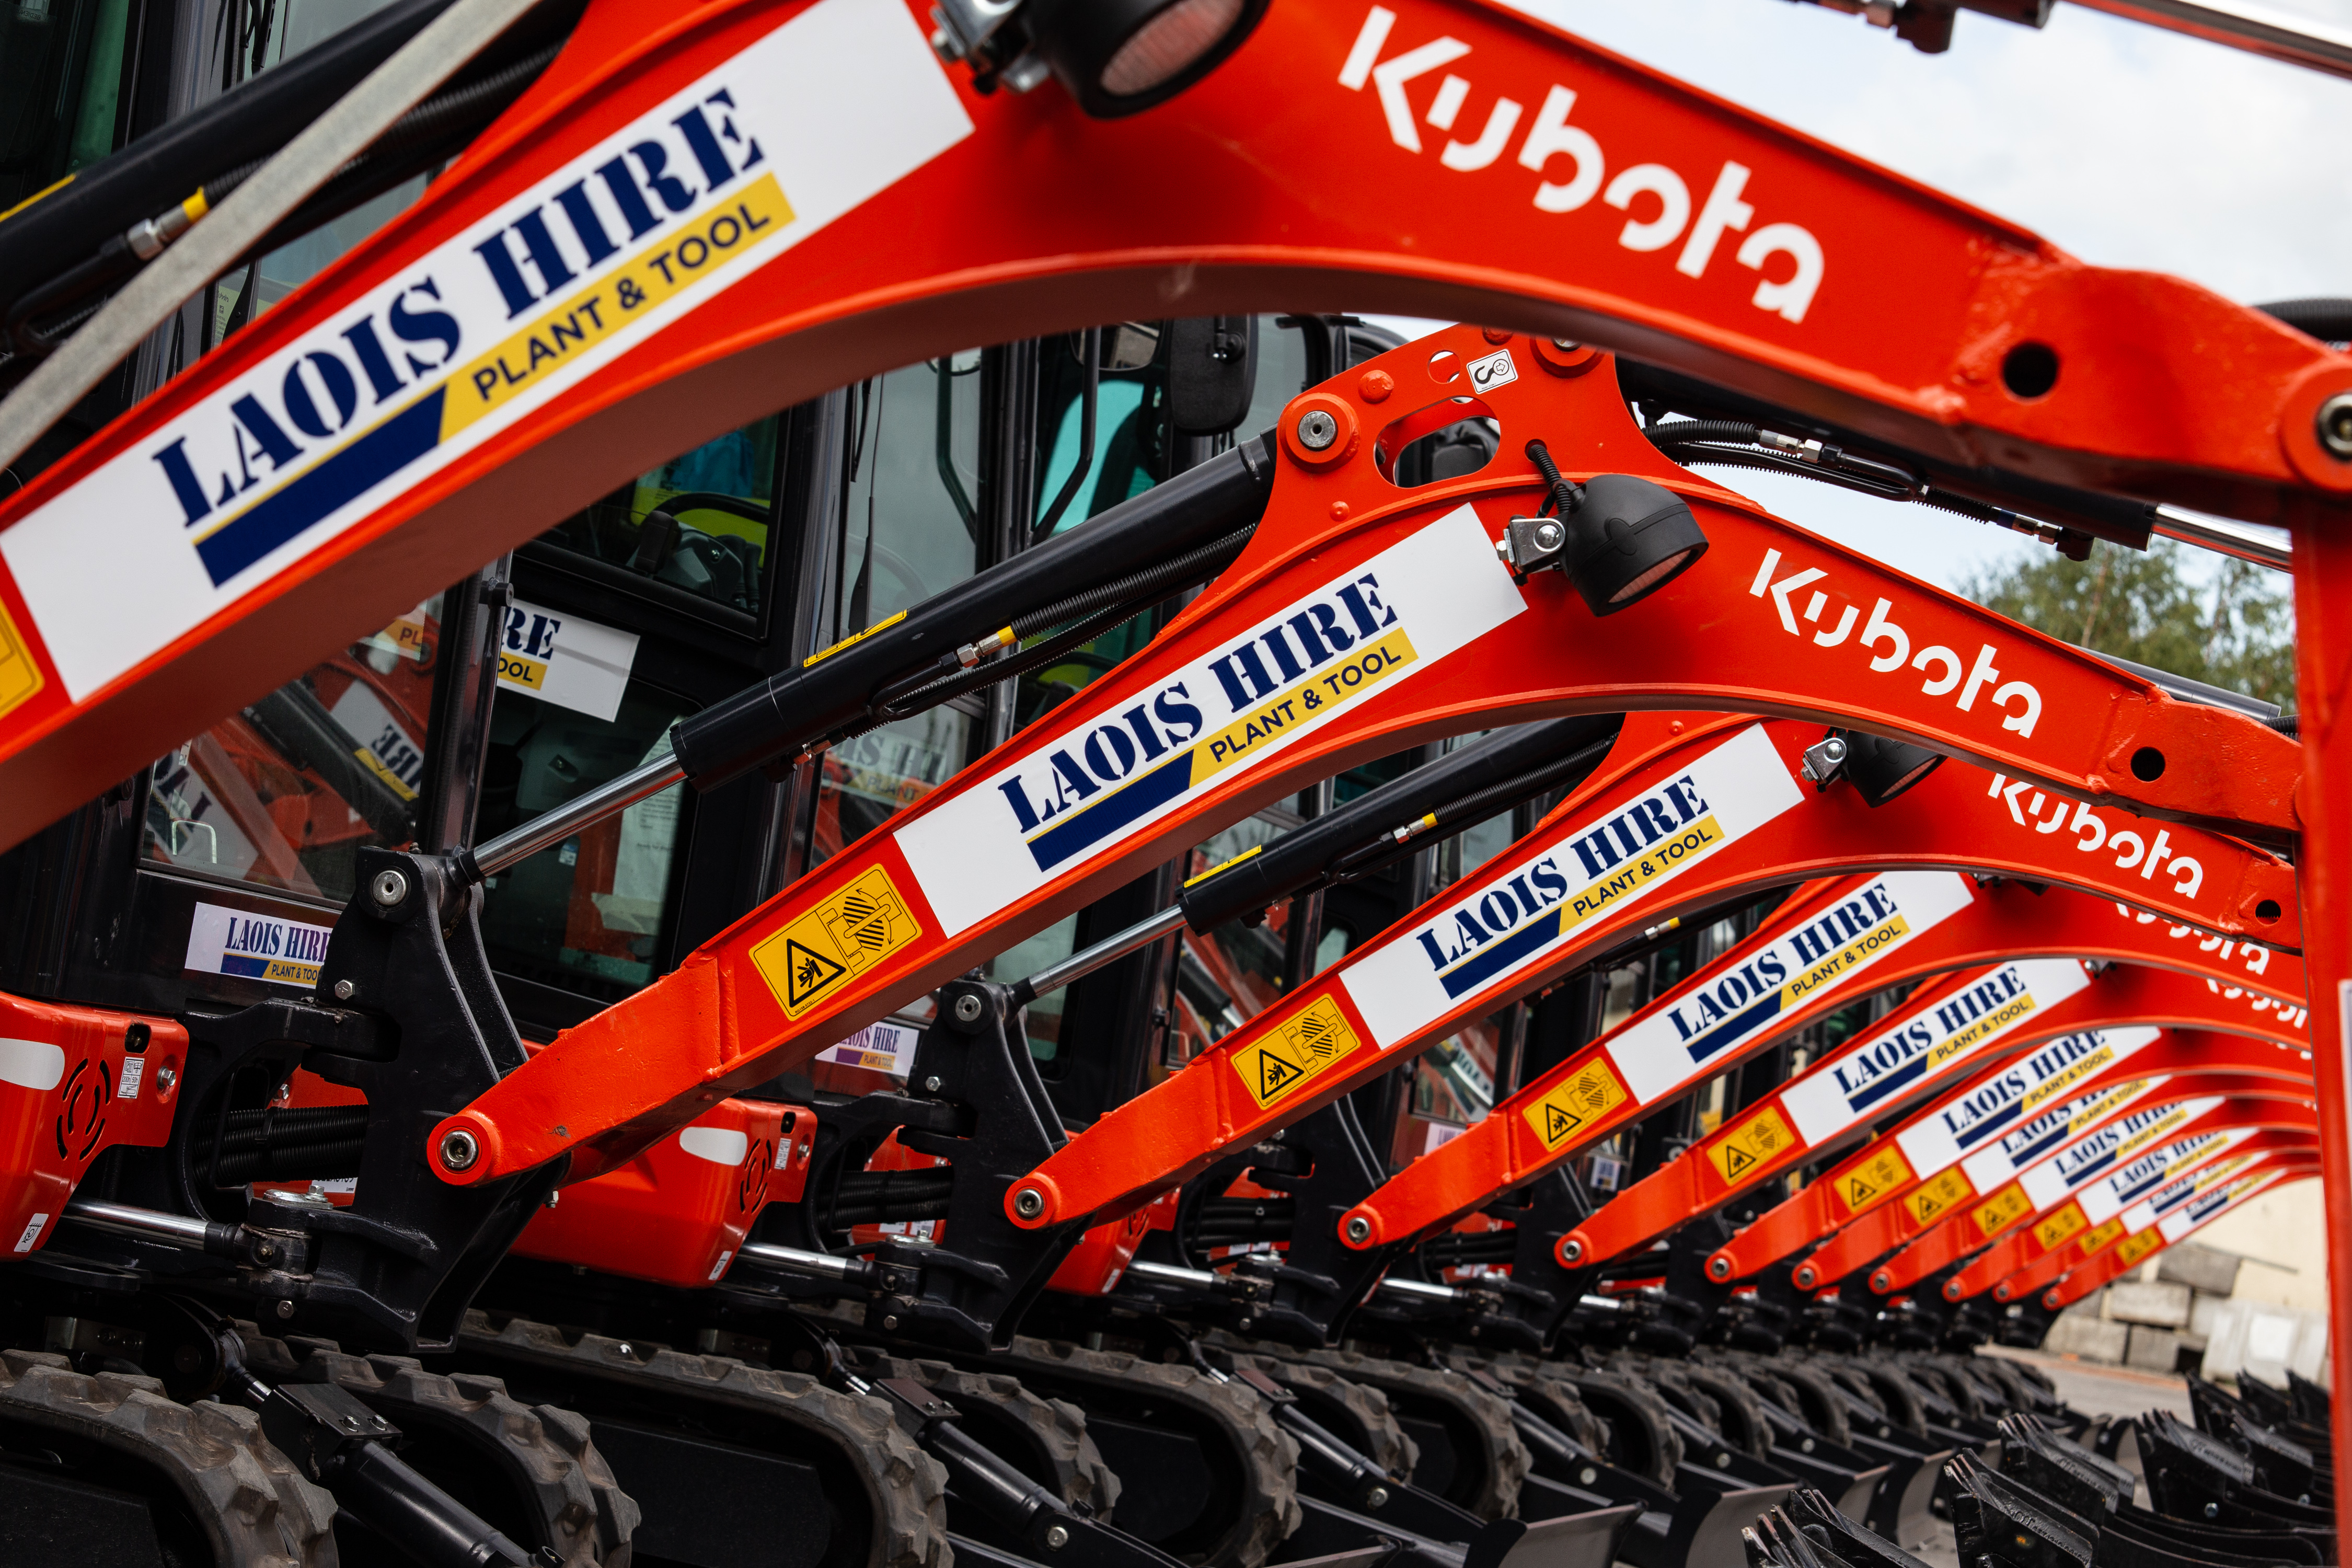 HSS Hire/Laois Hire Group continue their investment in quality Plant